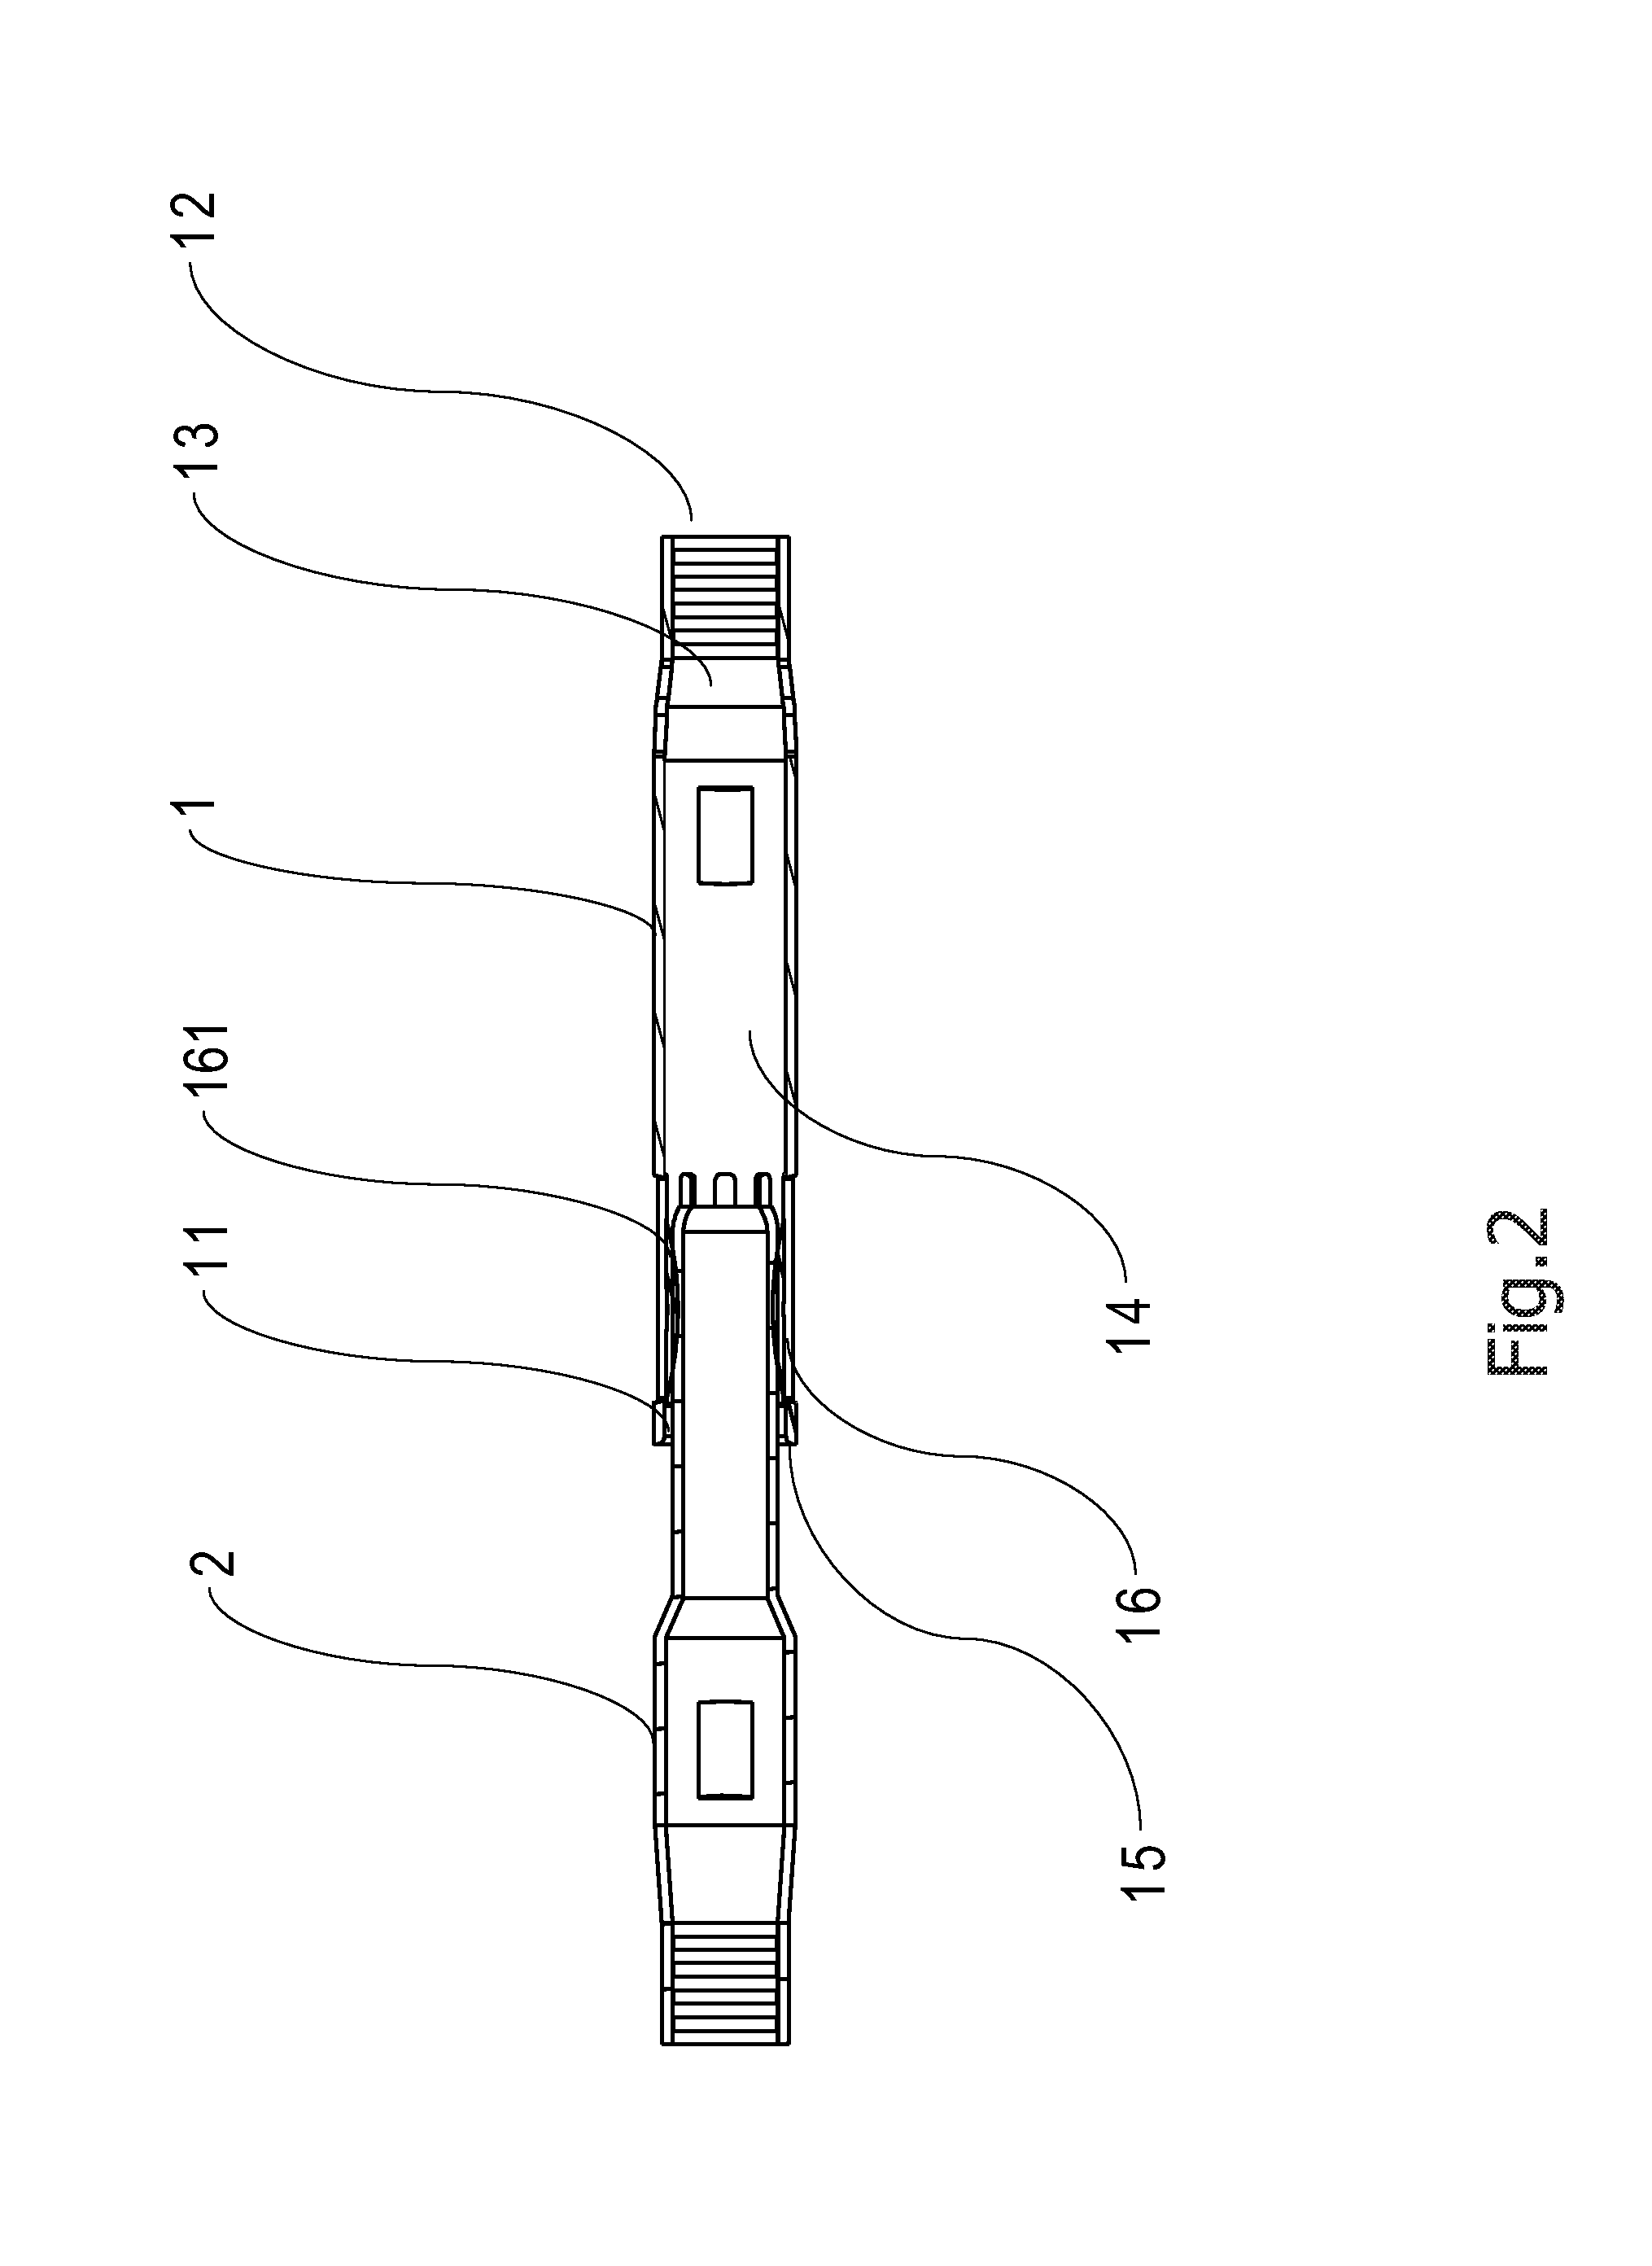 Waterproof connector and female terminal therein